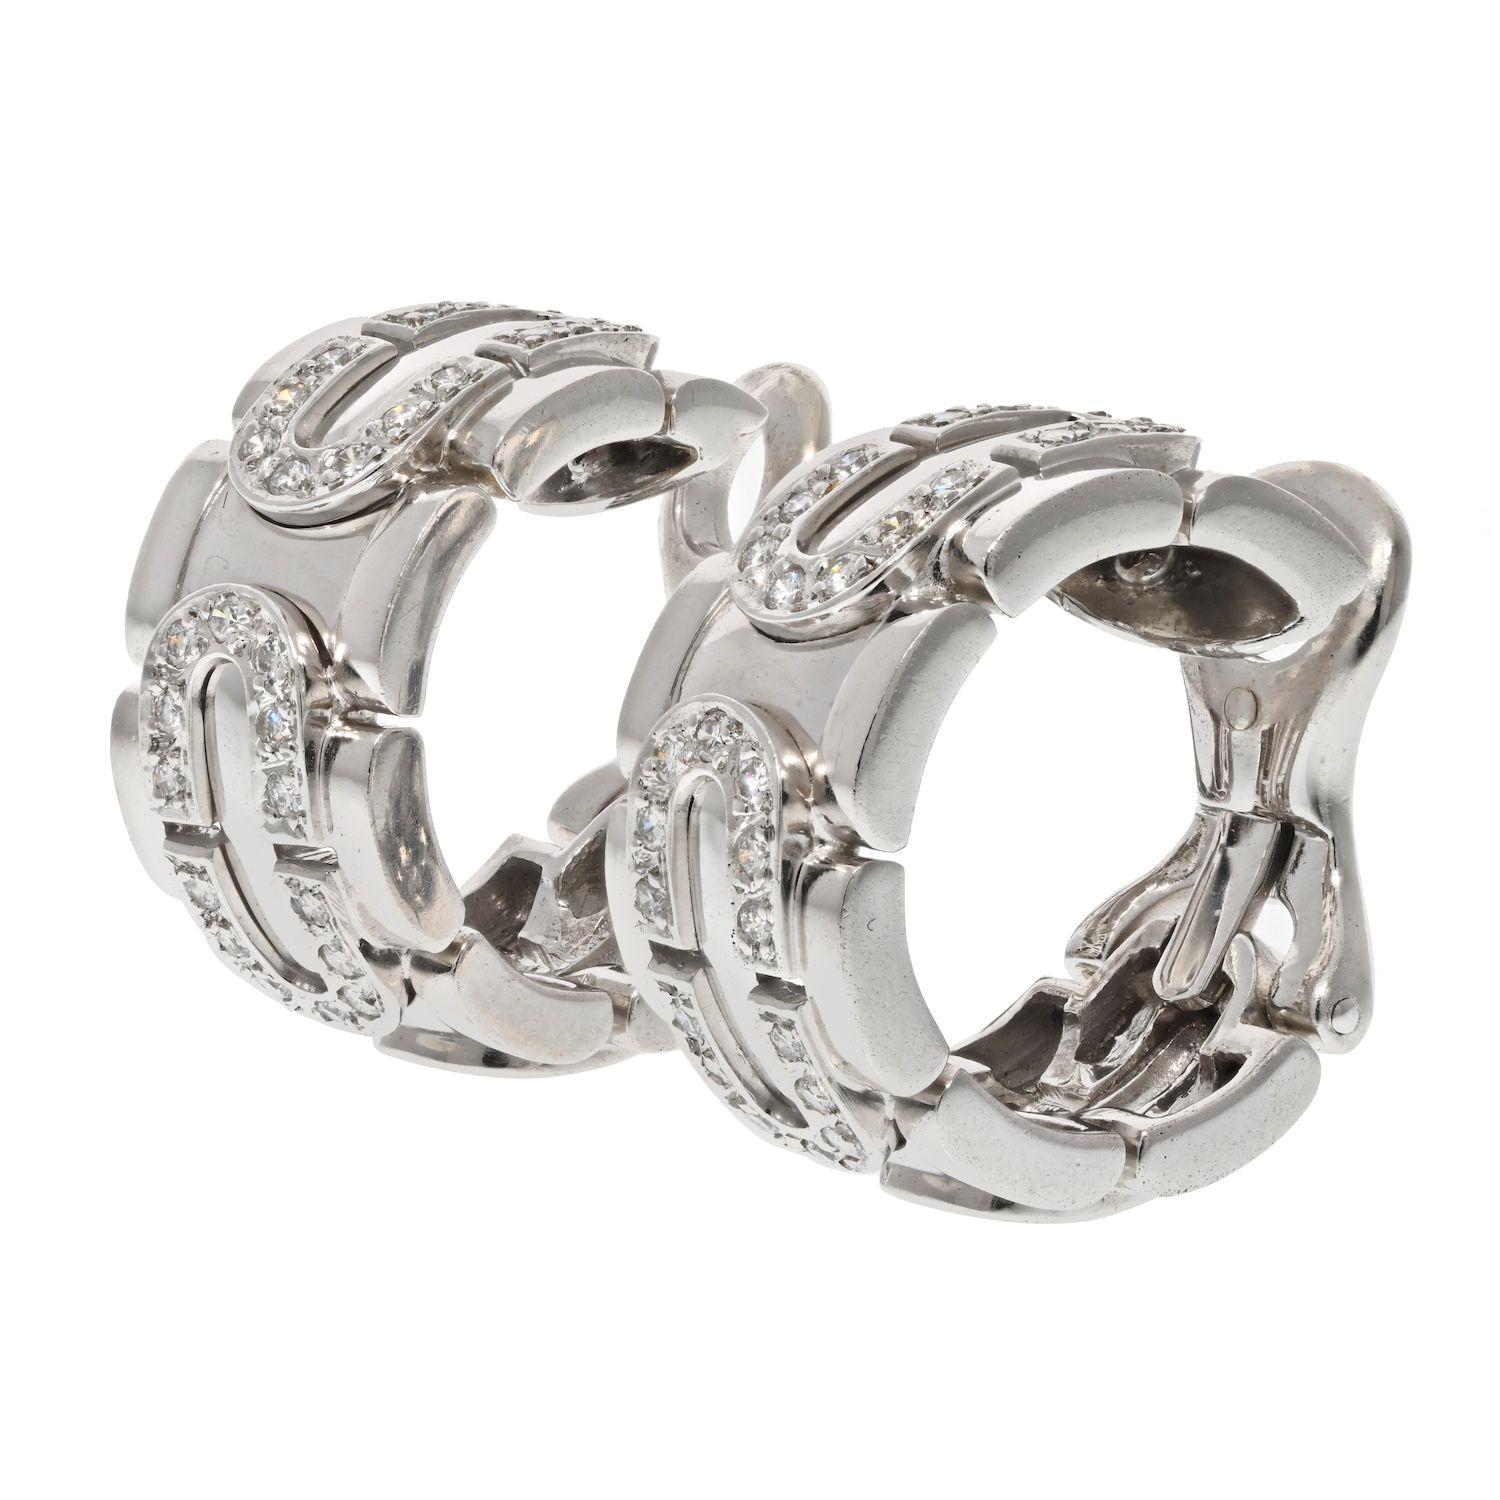 Cartier 18K White Gold Diamond Hoop Earrings.
Classic Cartier earrings from our estate collection. Popular clip-on style that is perfect to wear from day to night. 
Earrings measure: 1 inch long, and 0.4 inches wide.